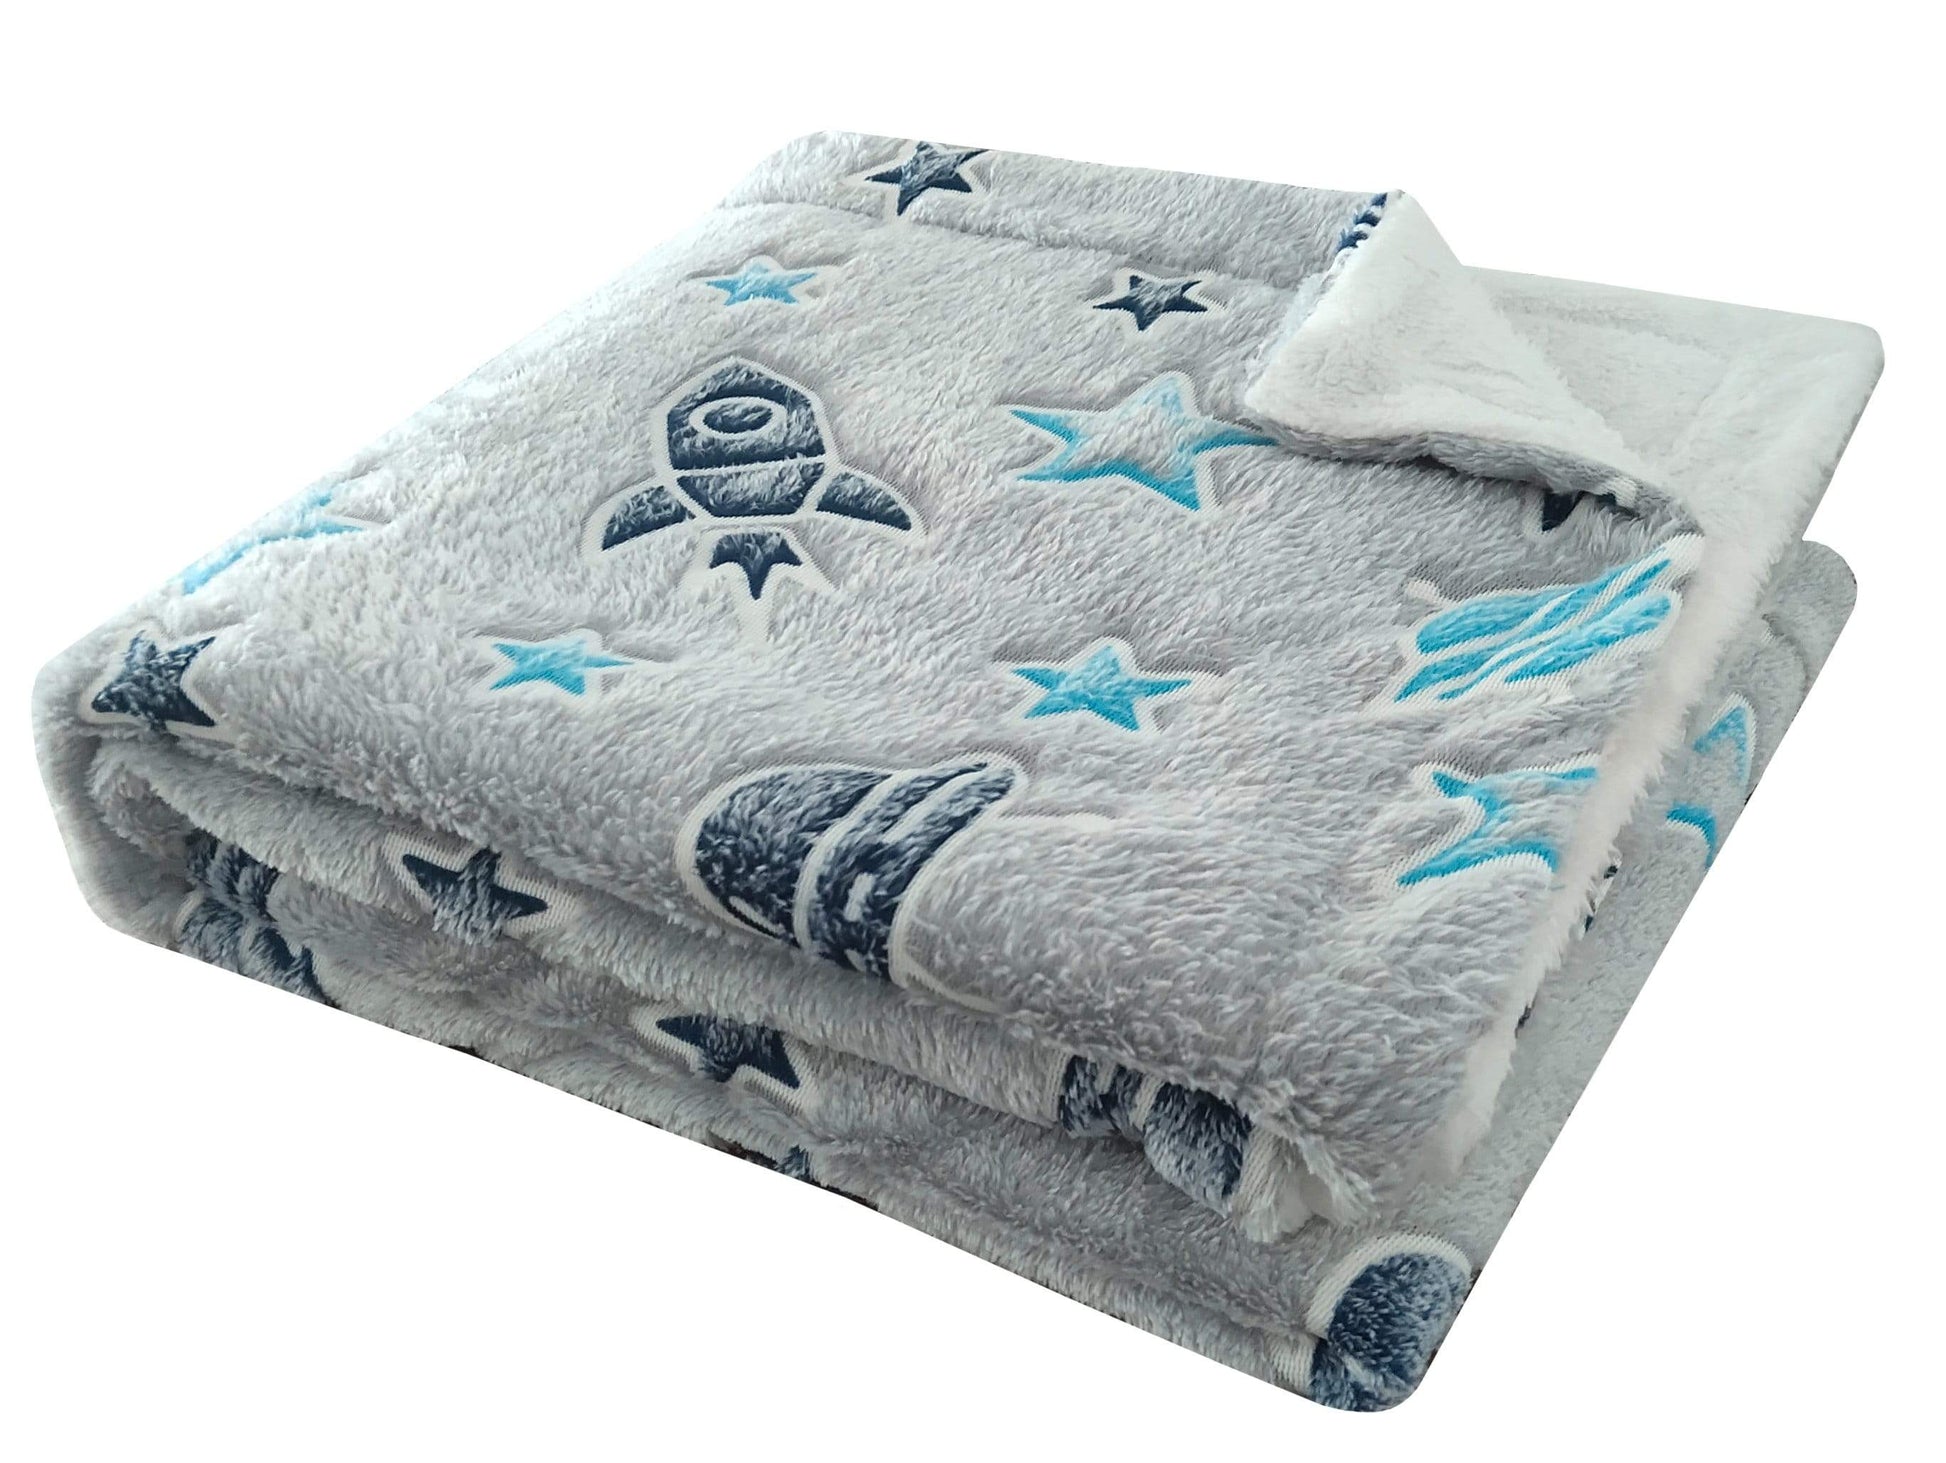 Outer Space Glow In The Dark Teddy Duvet Set THROW OLIVIA ROCCO Duvet Cover